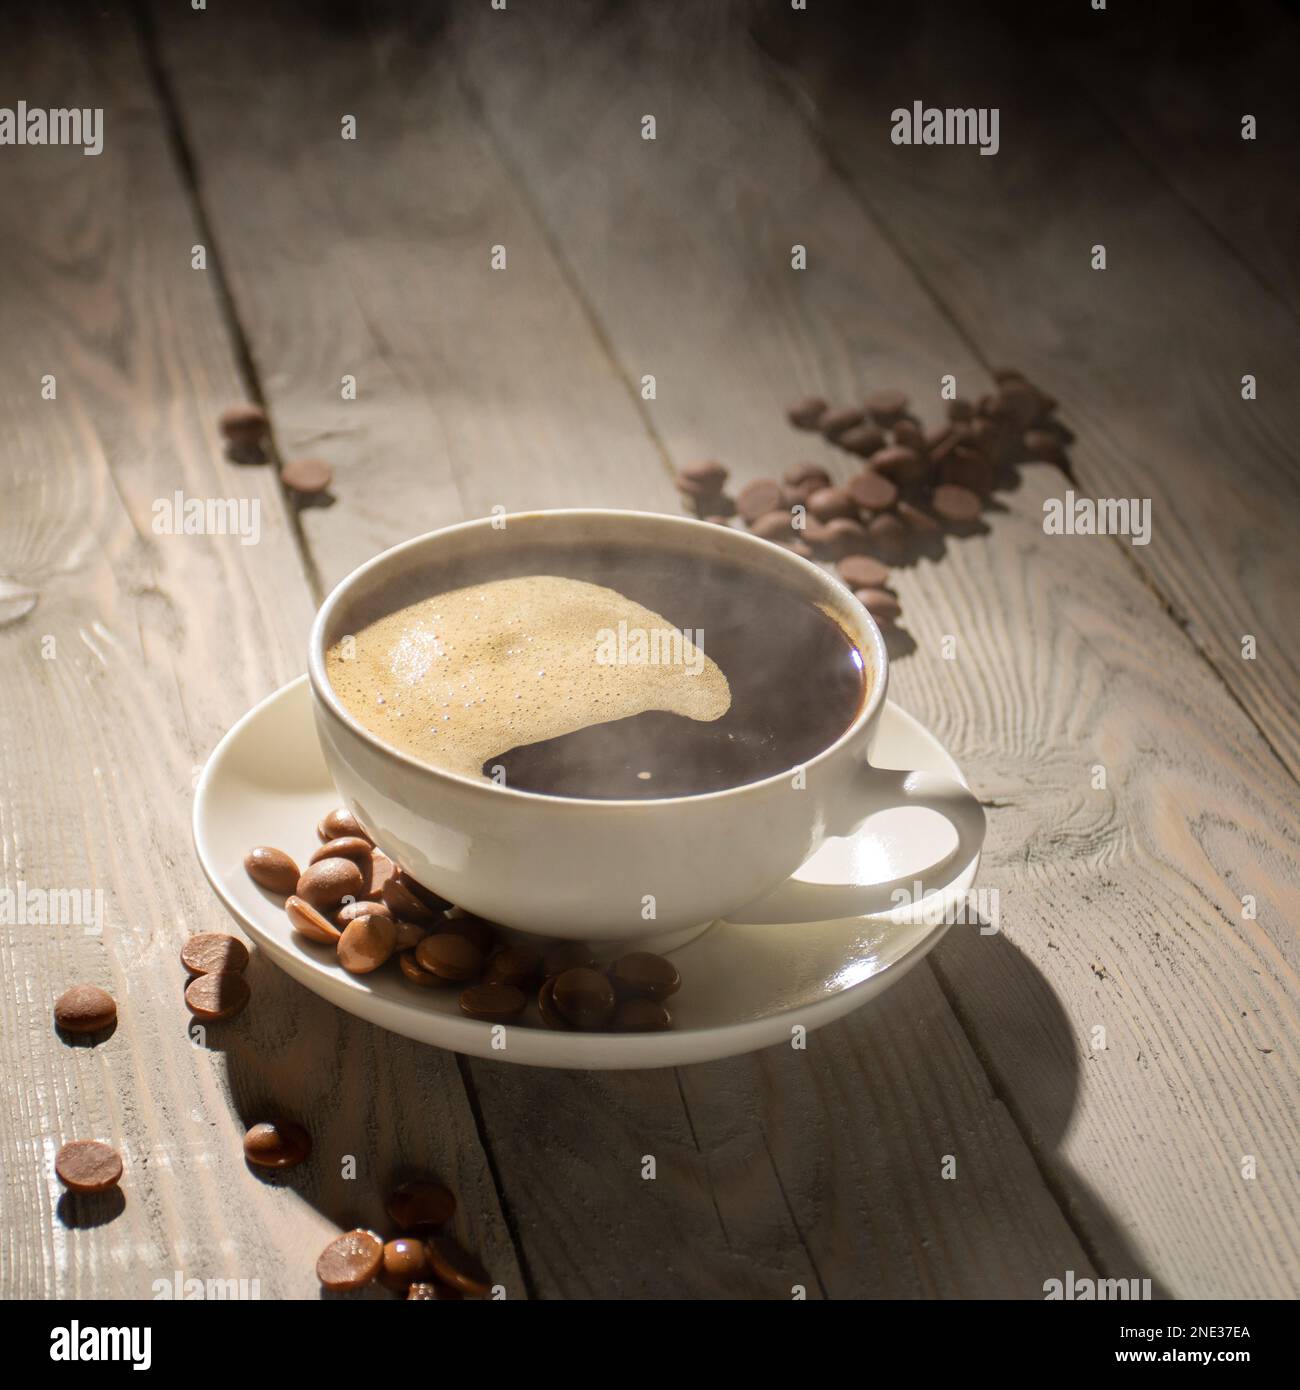 White cup of hot coffee with steam on a wooden table backlit. Stock Photo